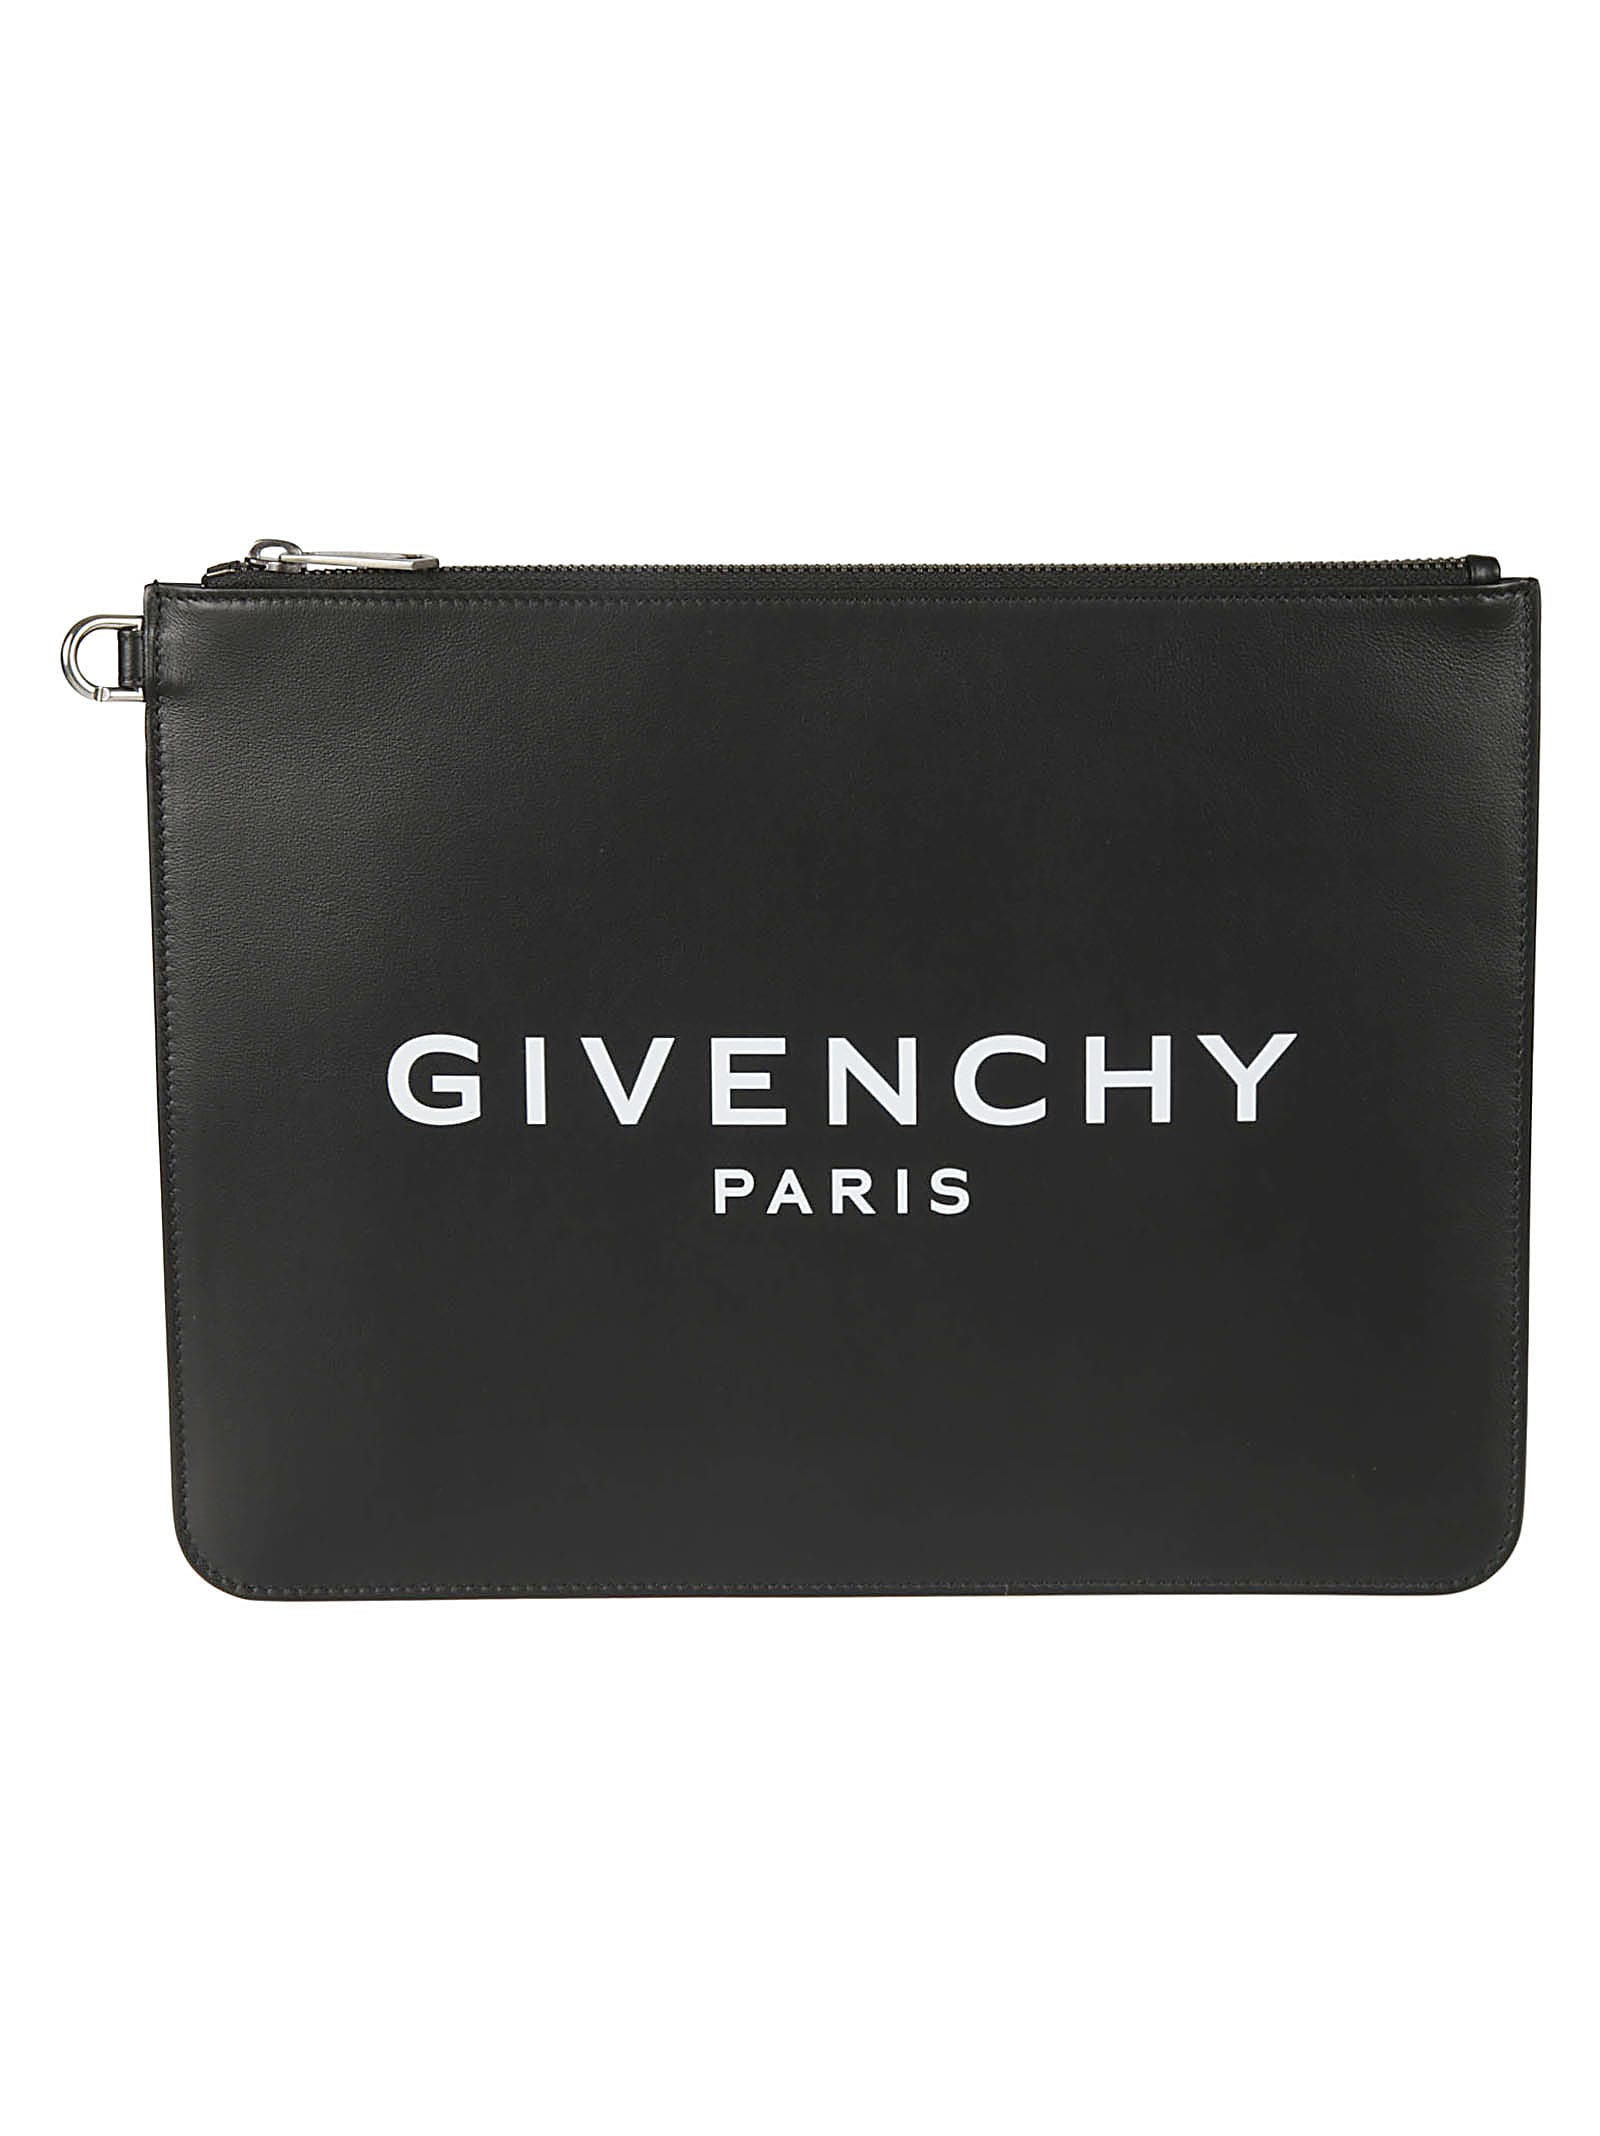 Givenchy Large Zipped Clutch